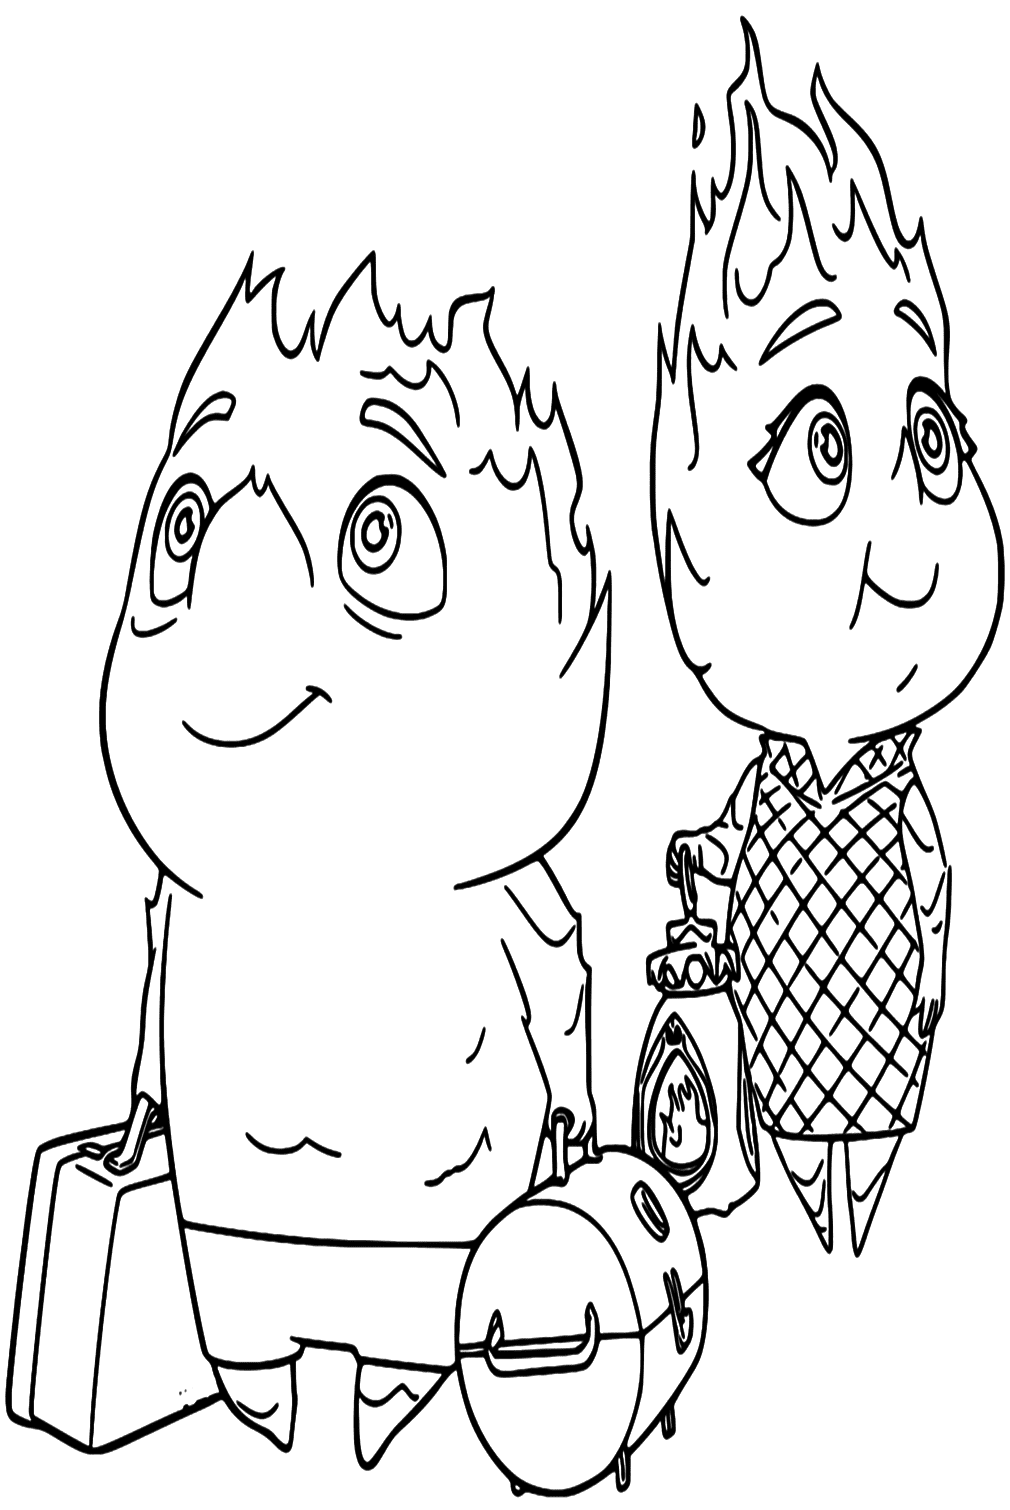 Cinder Ripple And Bernie Coloring Page from Elemental